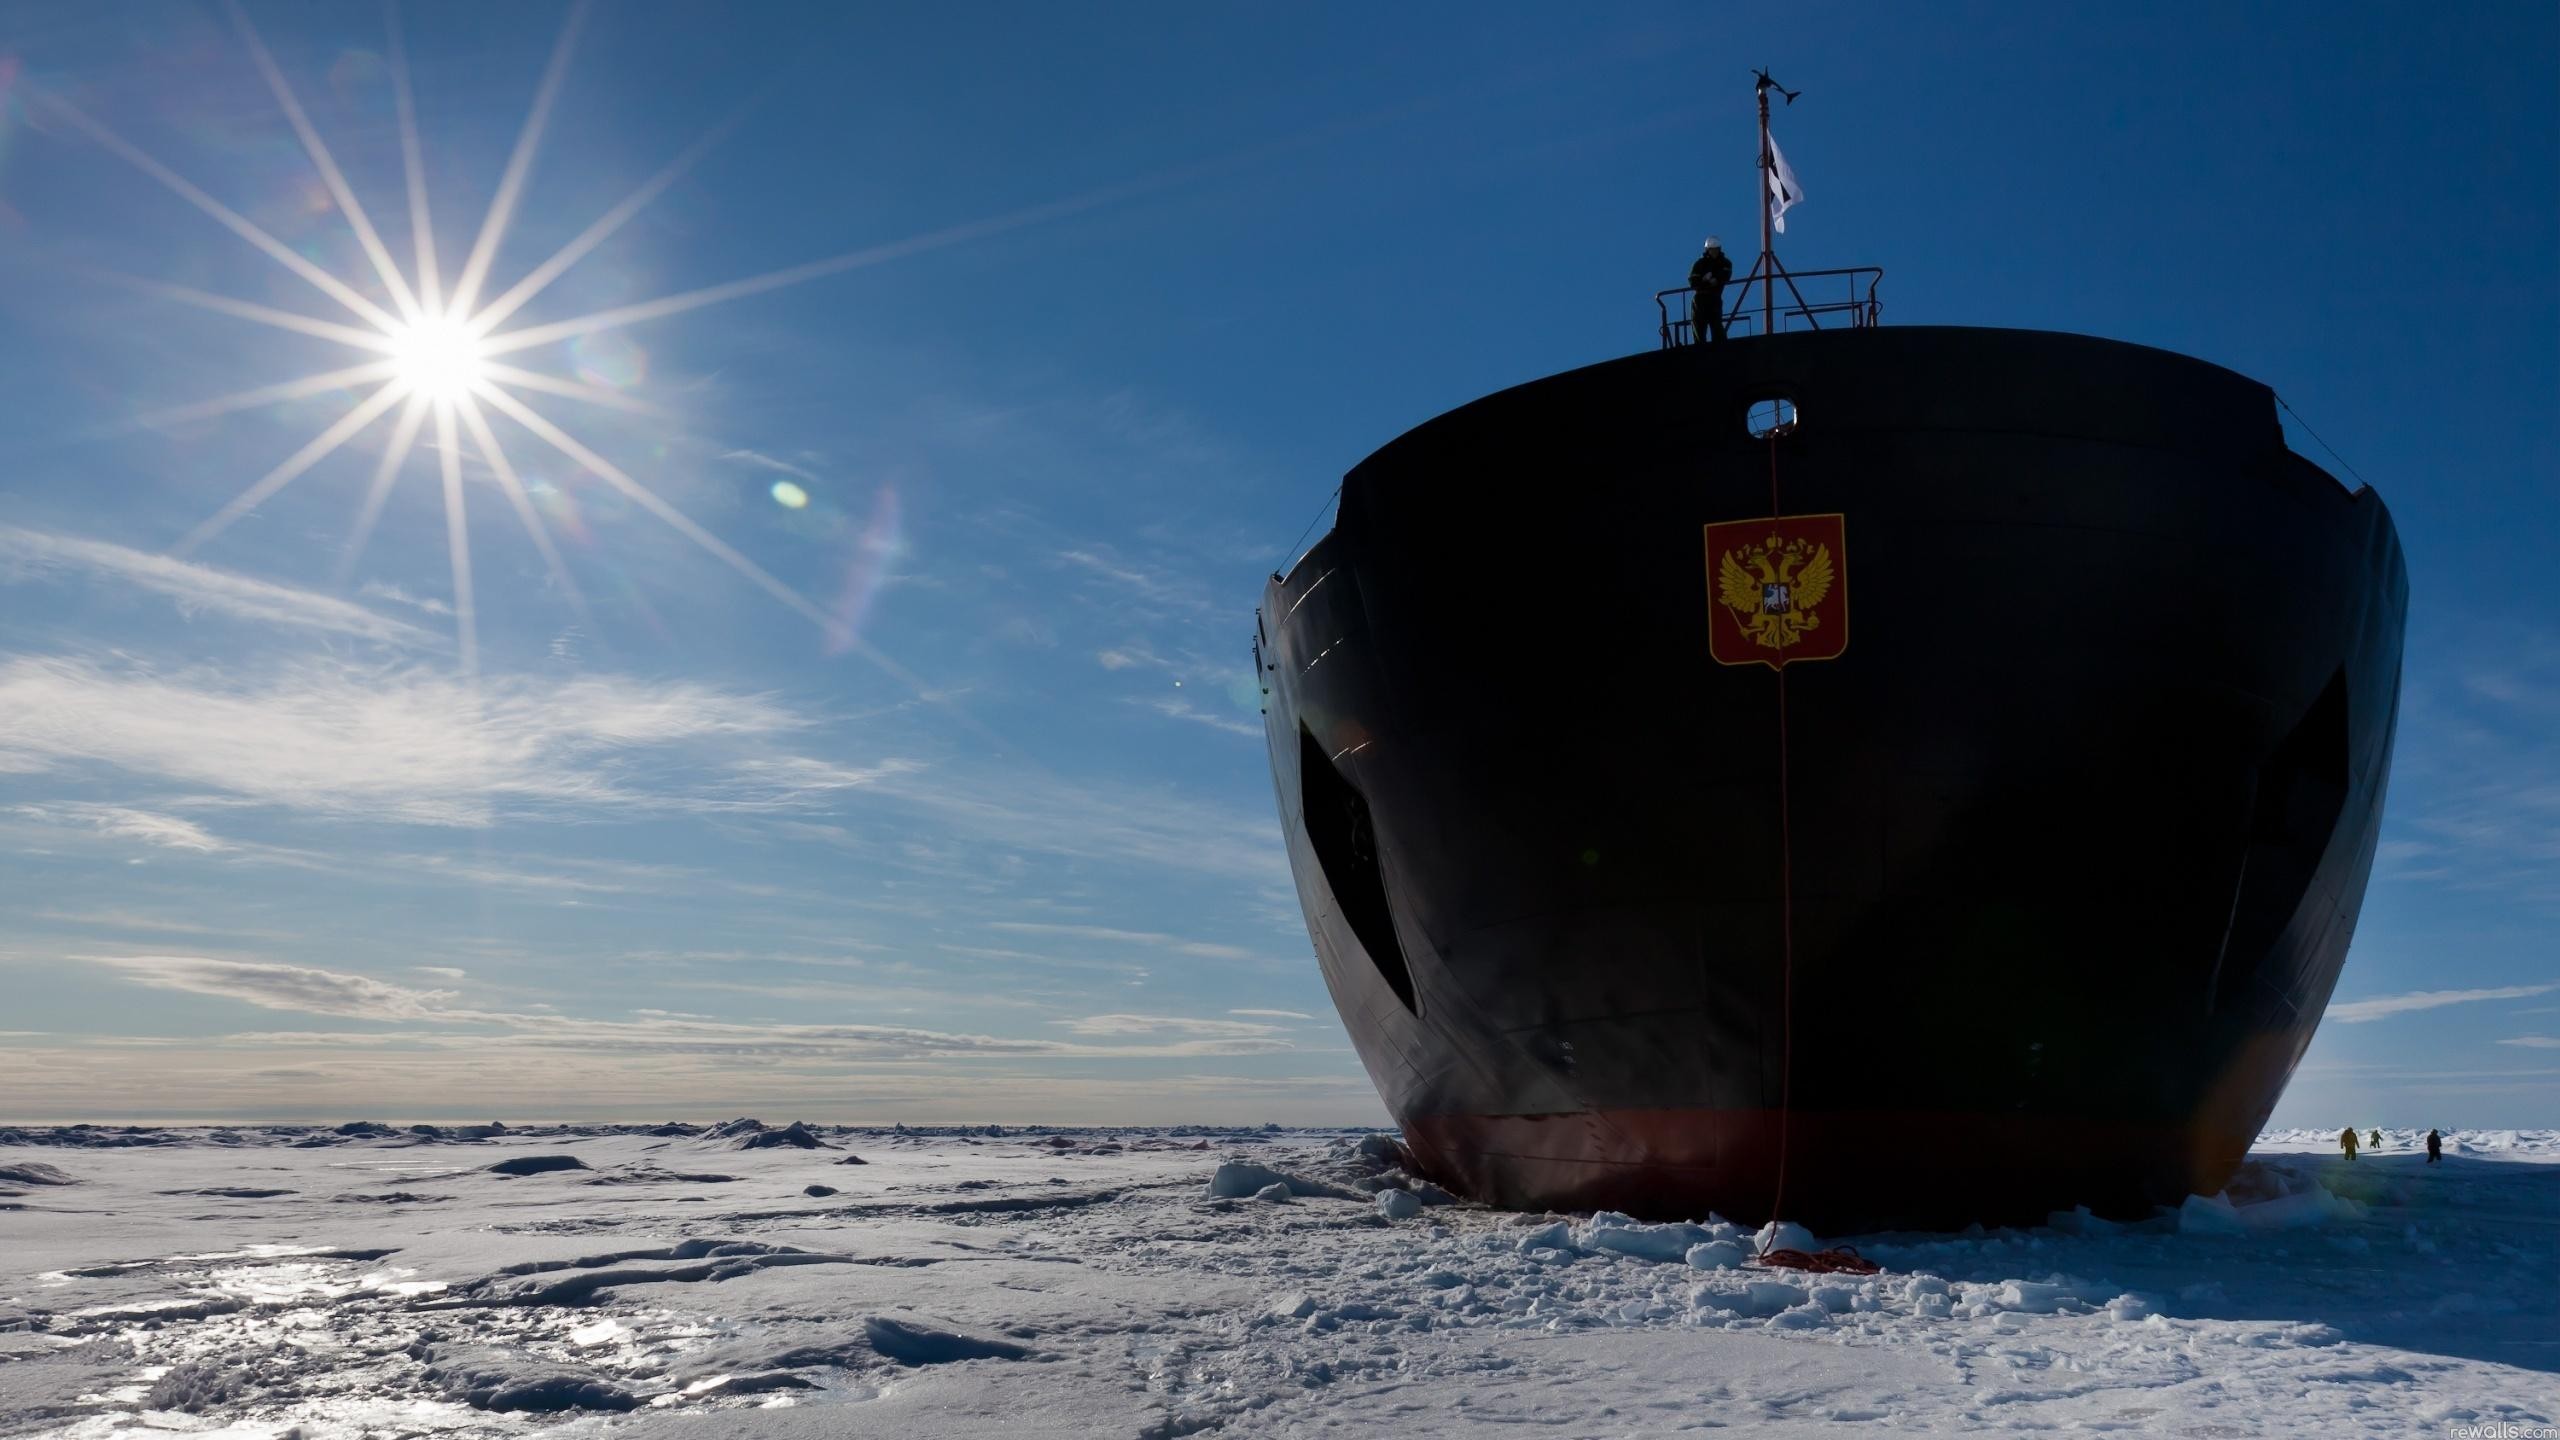 ship cargo shadow winter ice snow russian sun clouds icebreakers men ropes flag coat of arms sunlight Wallpaper